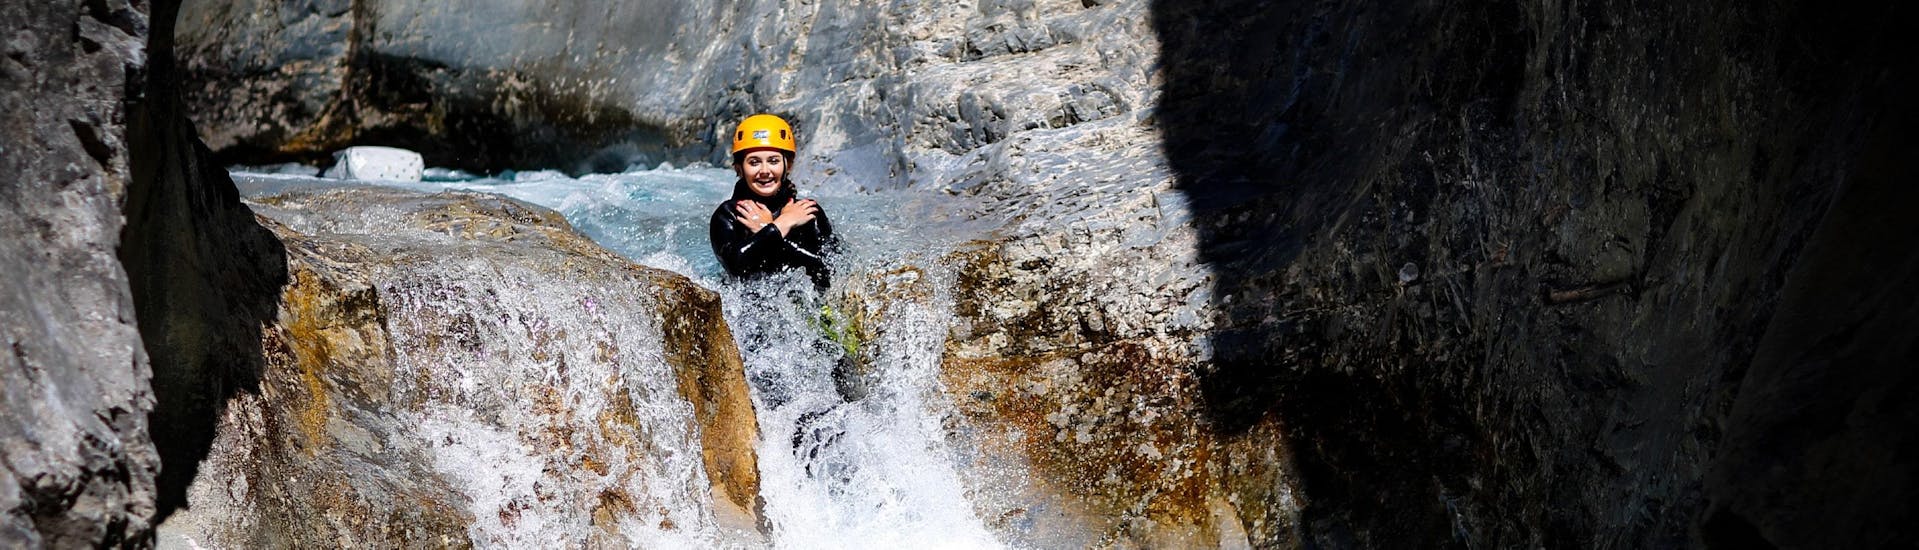 Canyoning facile a Serre-Chevalier - Chantemerle - Ecrins National Park.